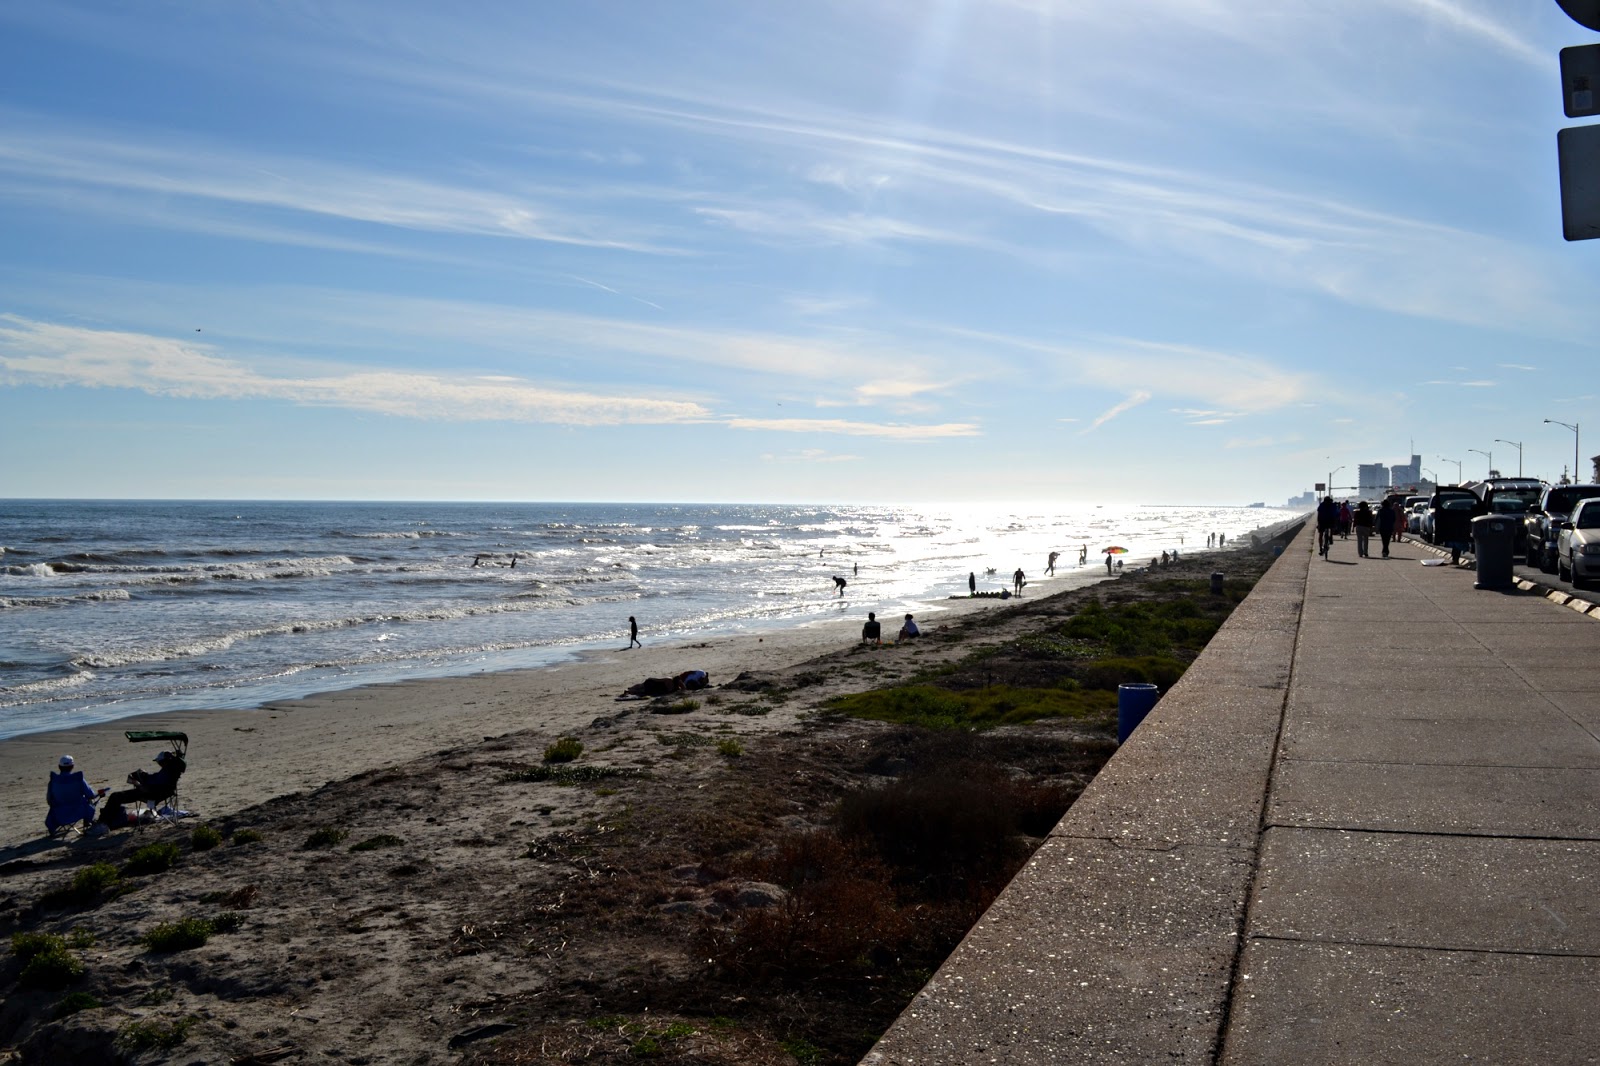 Galveston Club Paradise: Just What is this Seawall? - Insanity Is Not